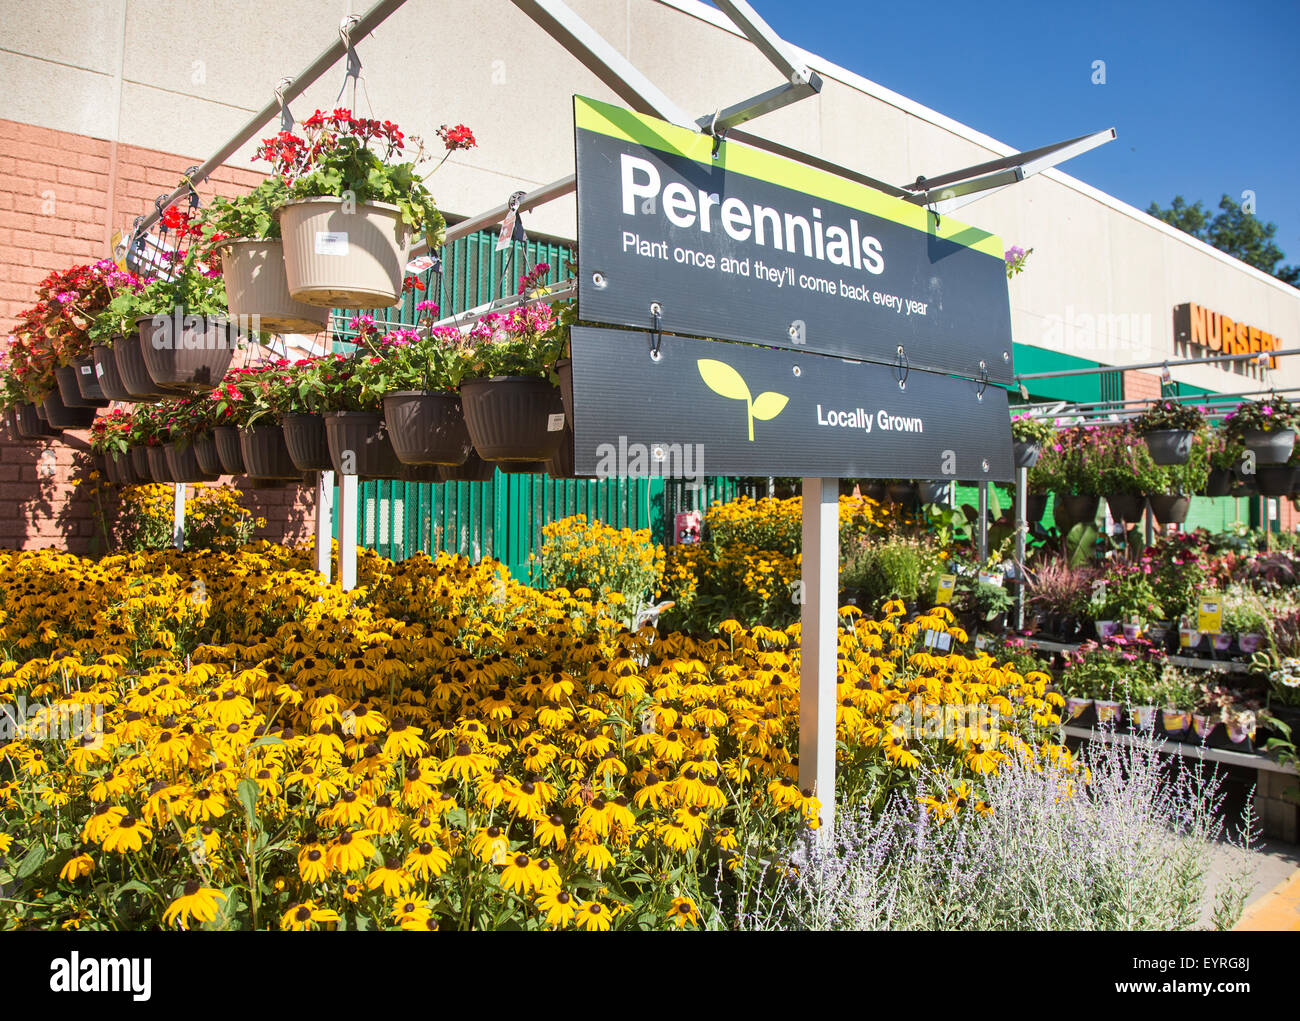 Perennials for sale at a nursery Stock Photo